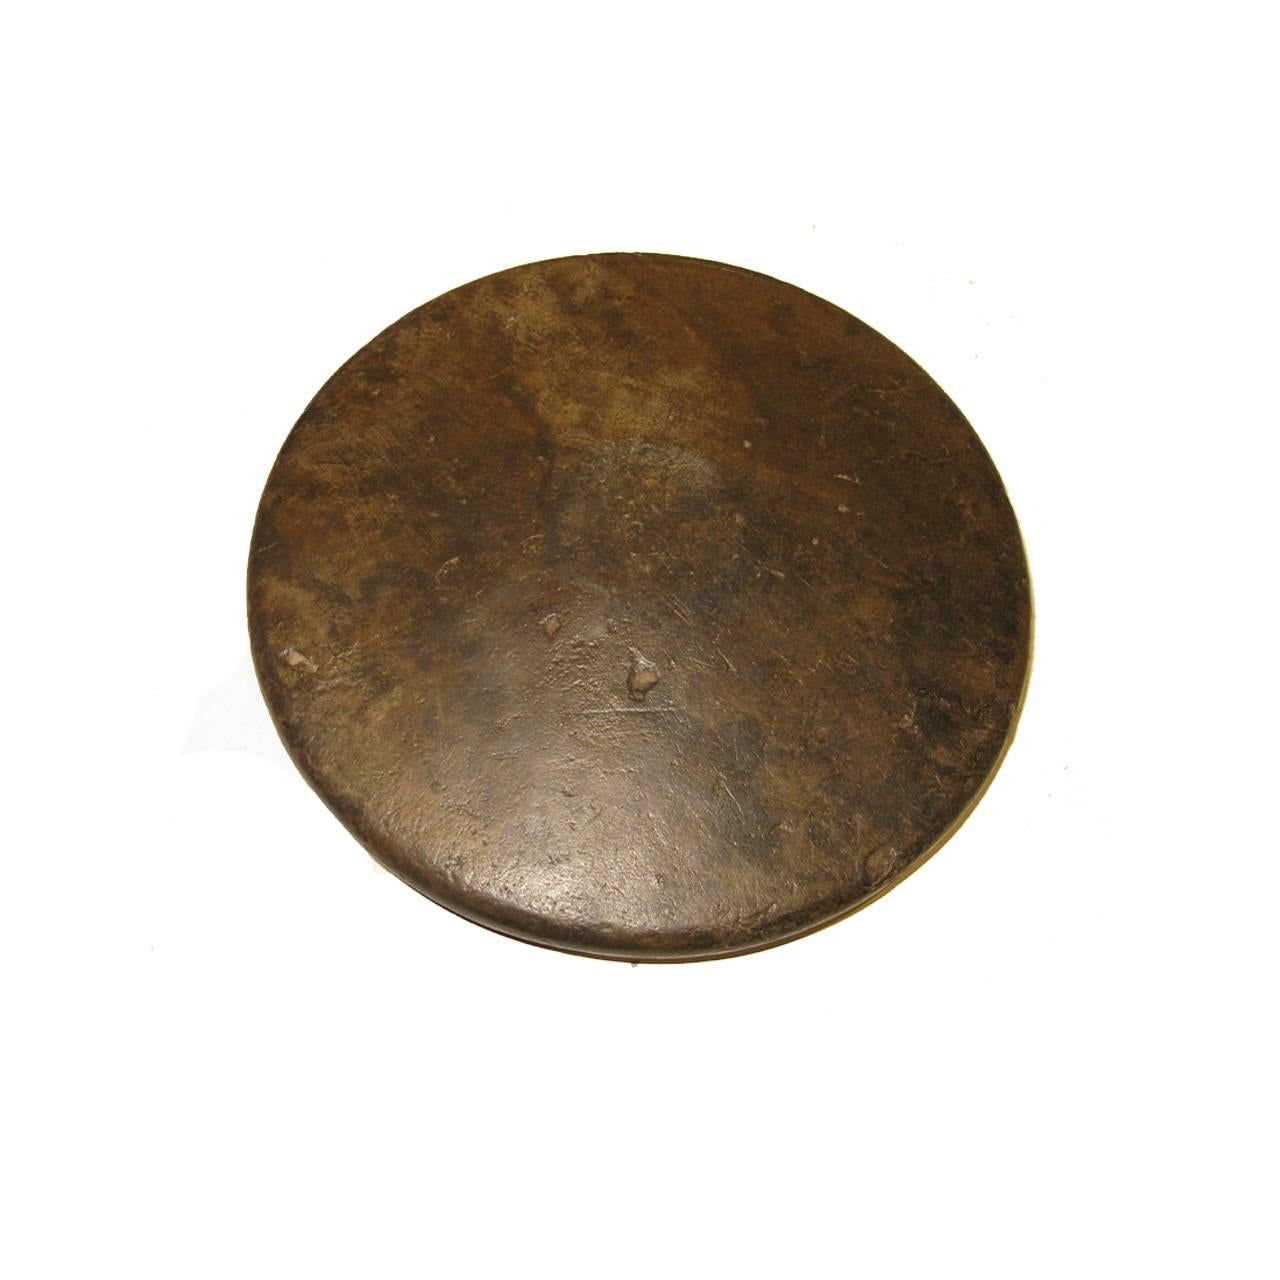 Handmade iron brass and wood field discus. Sport discus collectors items. Various sizes.

Set of five discs.

Measures: (X1) 8.75